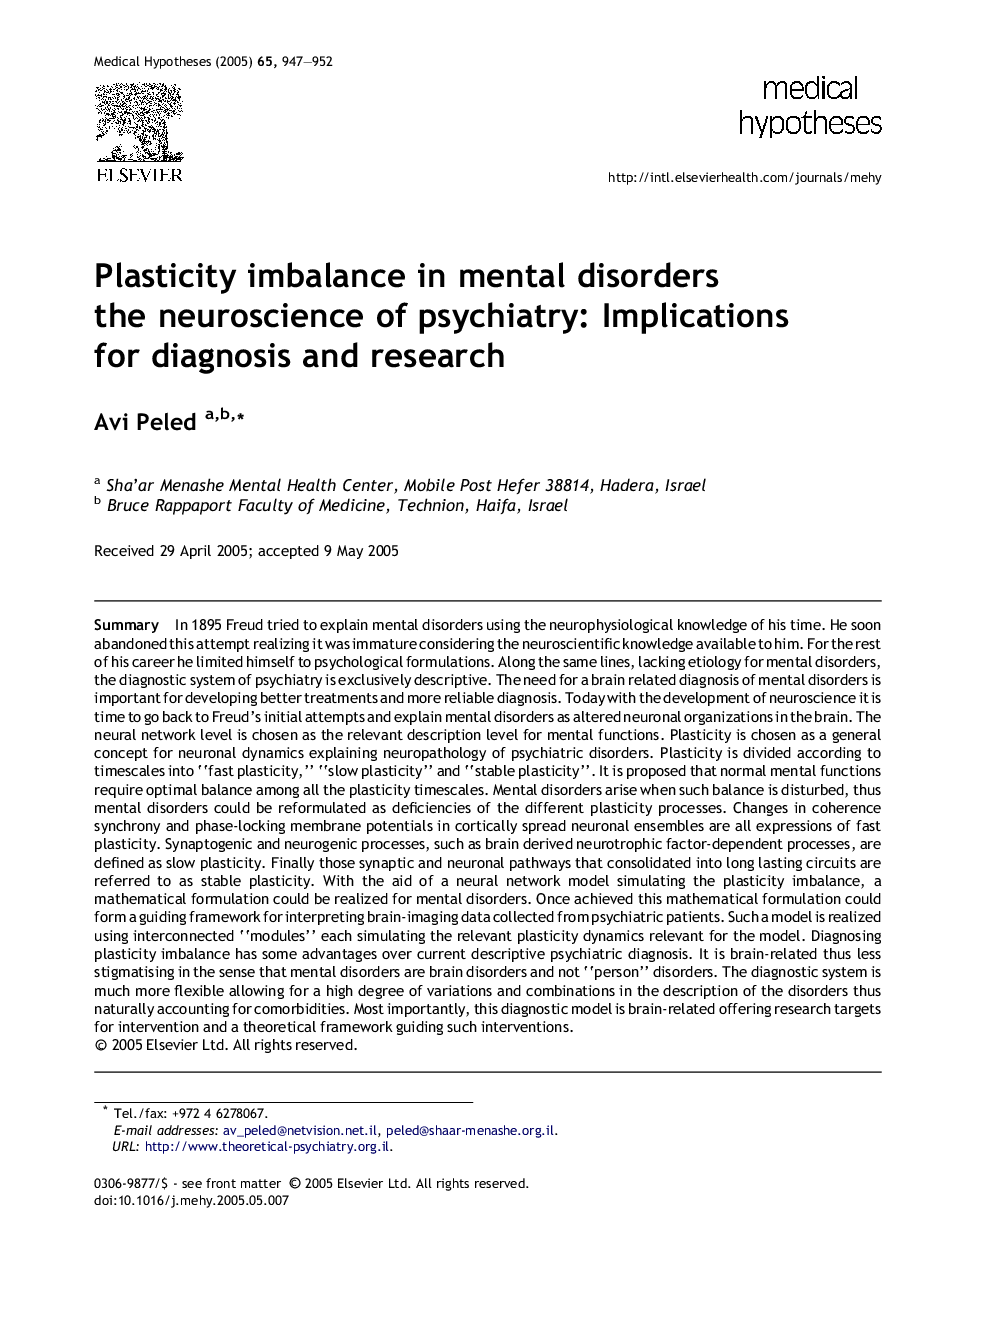 Plasticity imbalance in mental disorders the neuroscience of psychiatry: Implications for diagnosis and research